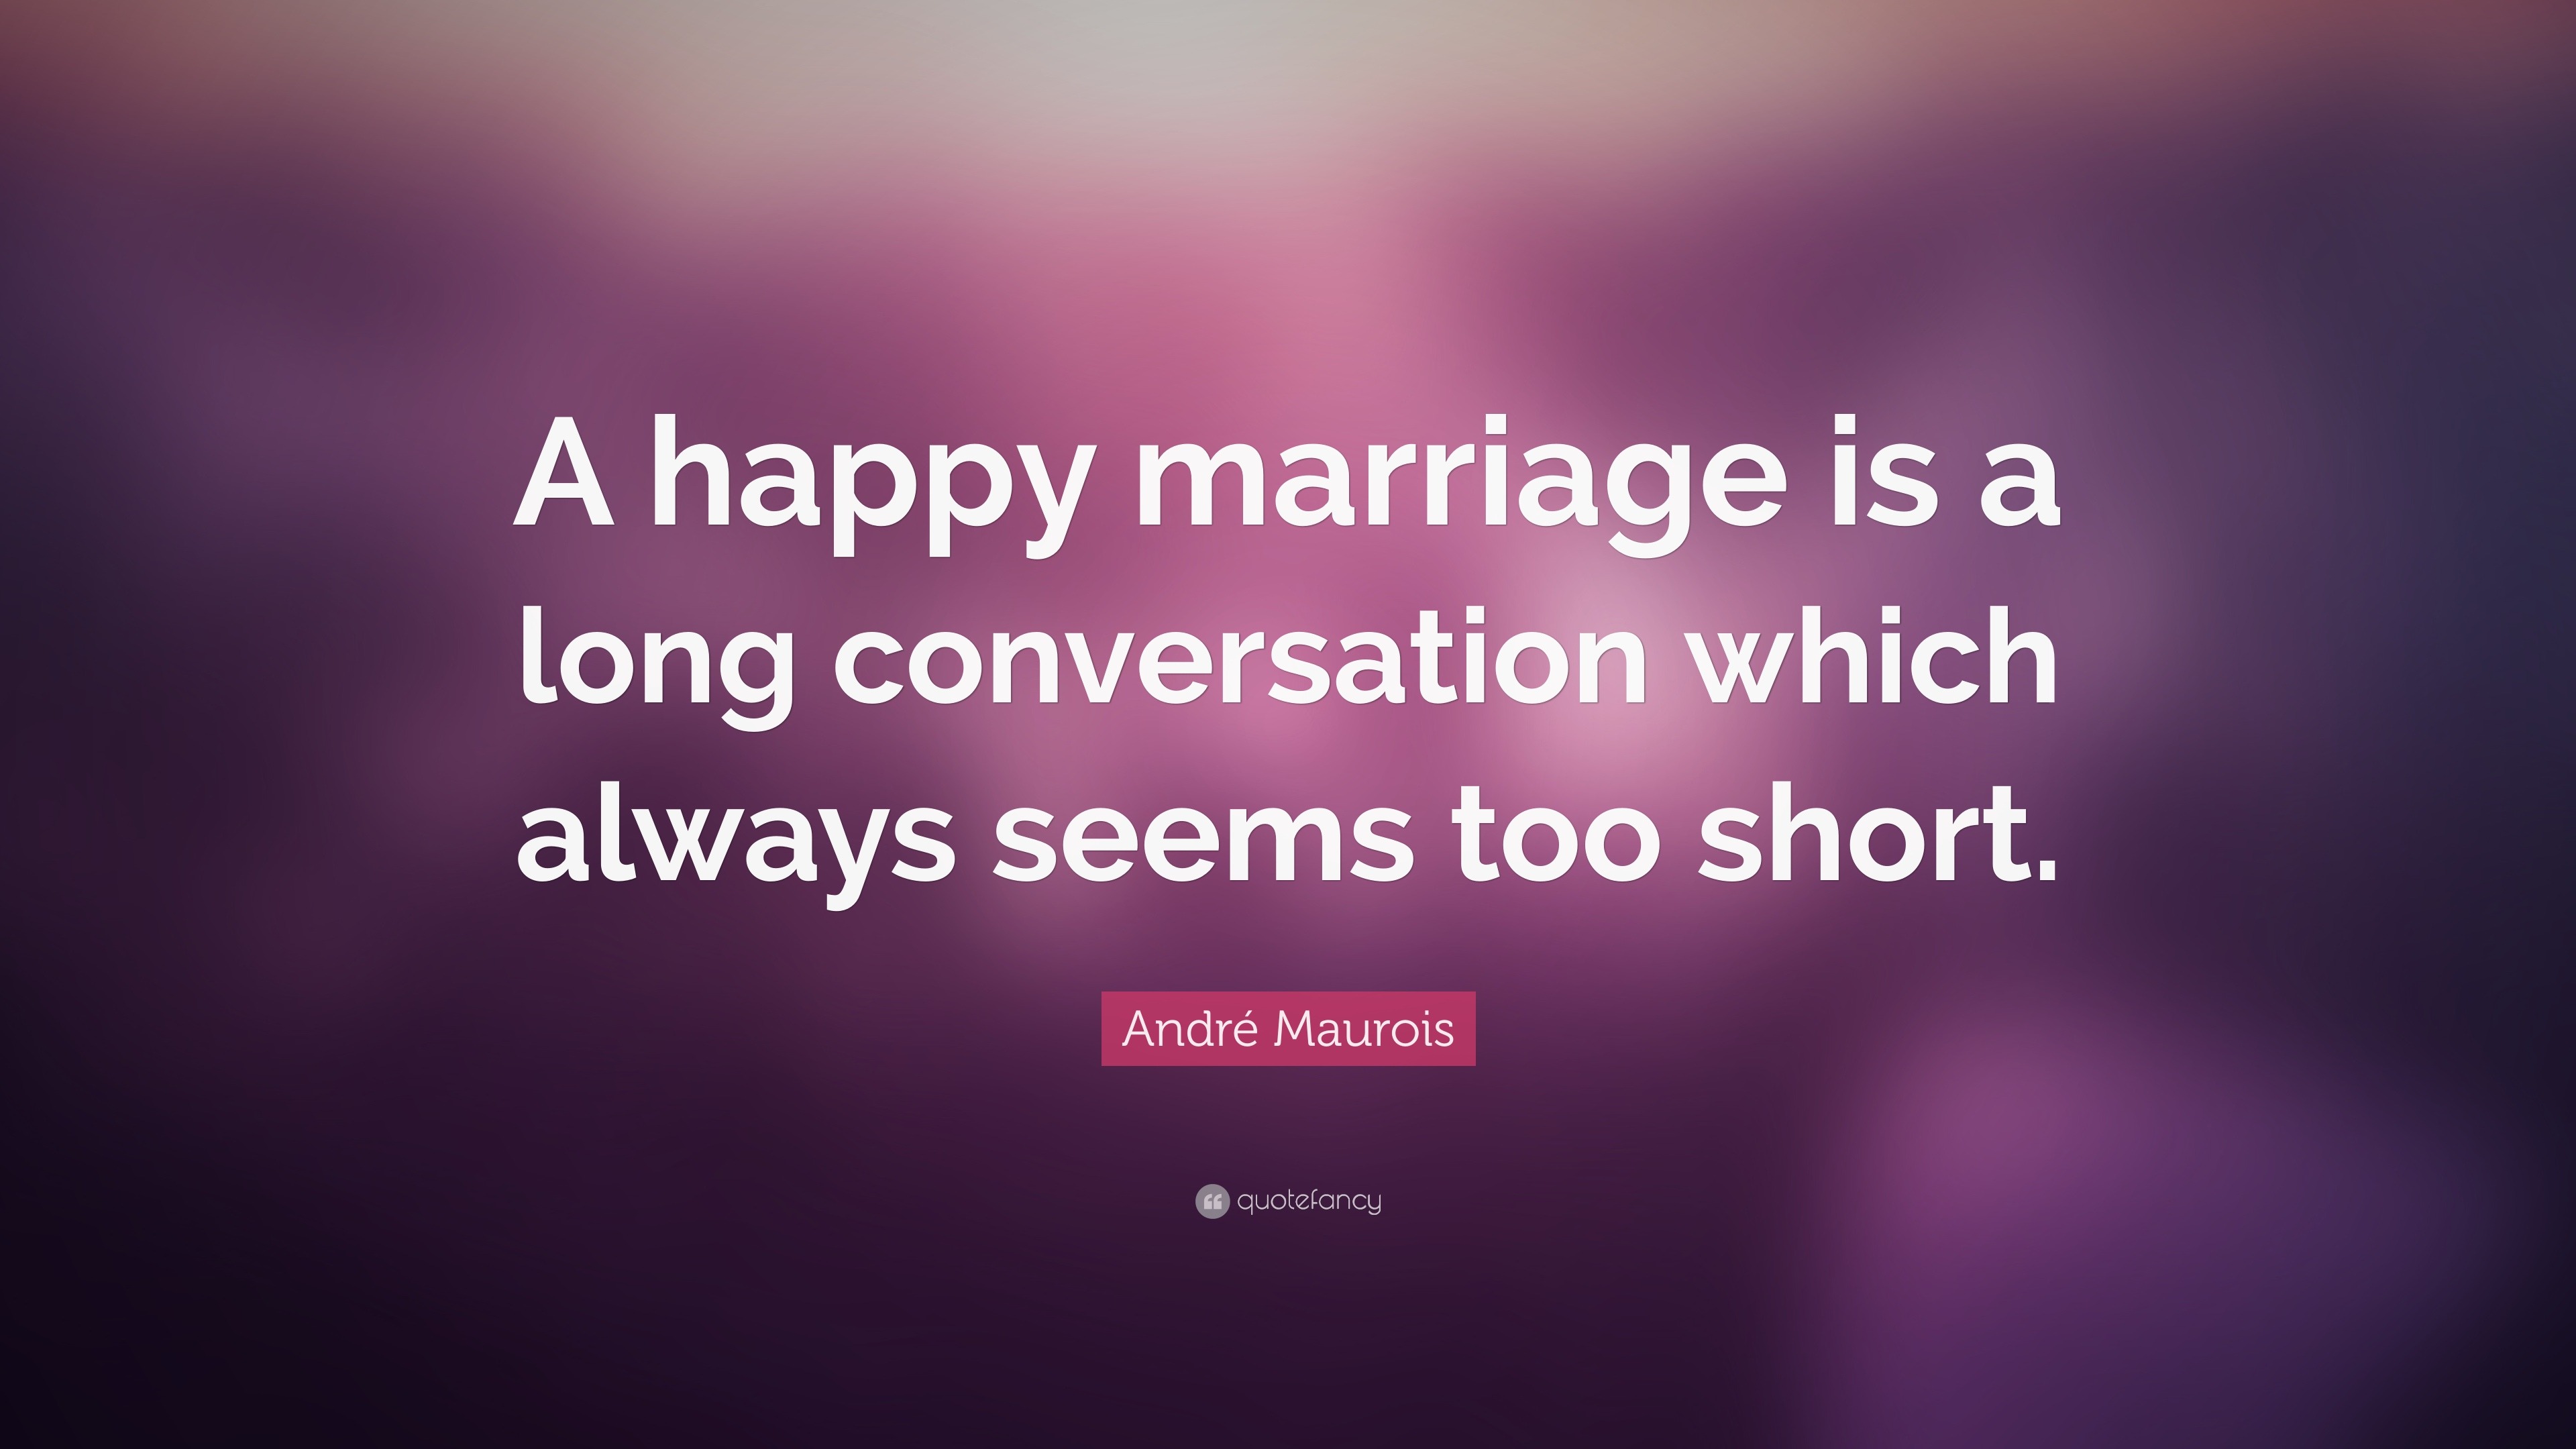 André Maurois Quote: “A happy marriage is a long conversation which ...